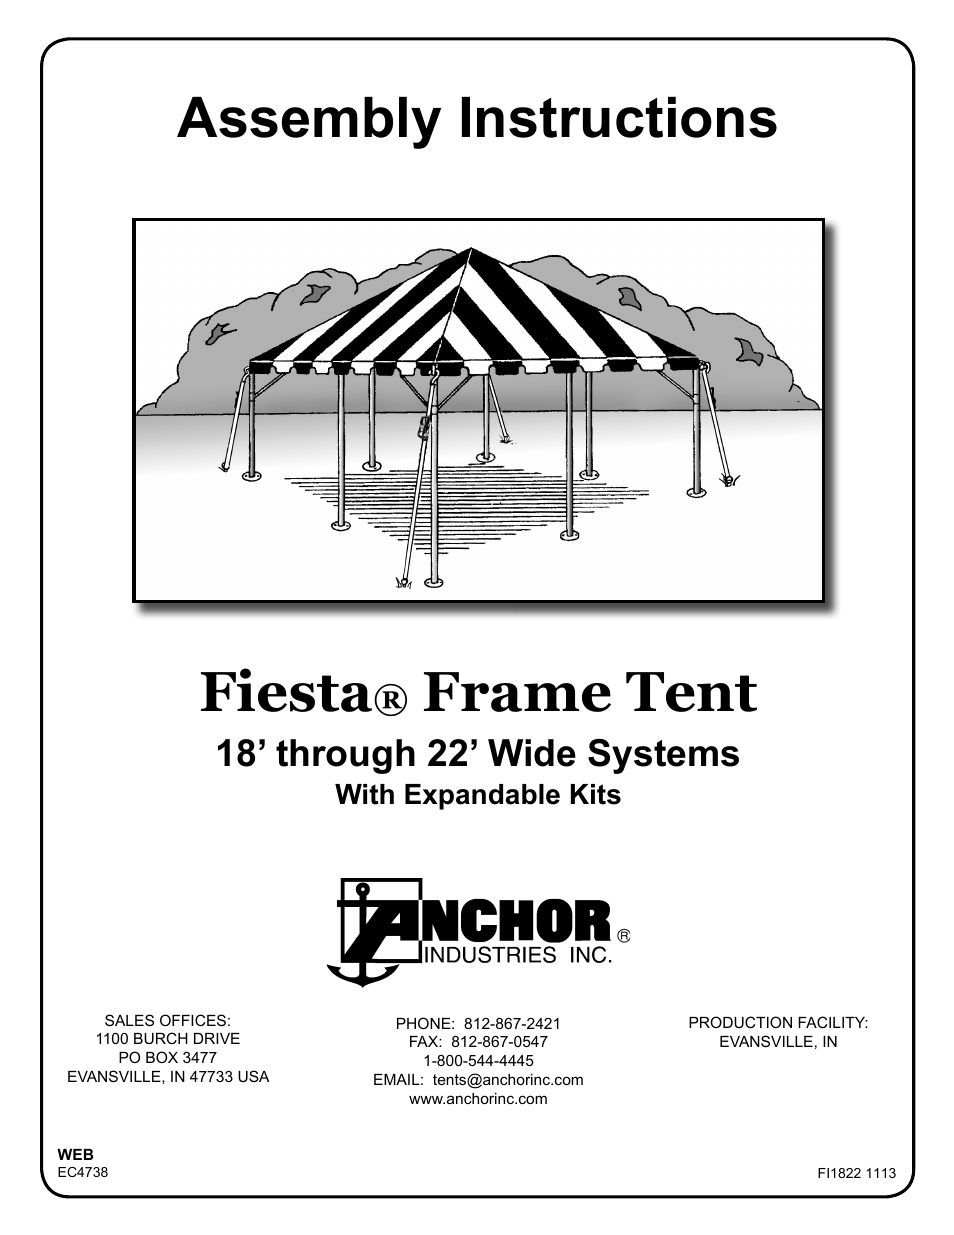 Anchor FIESTA FRAME TENT 18-22 User Manual | 10 pages | Original mode